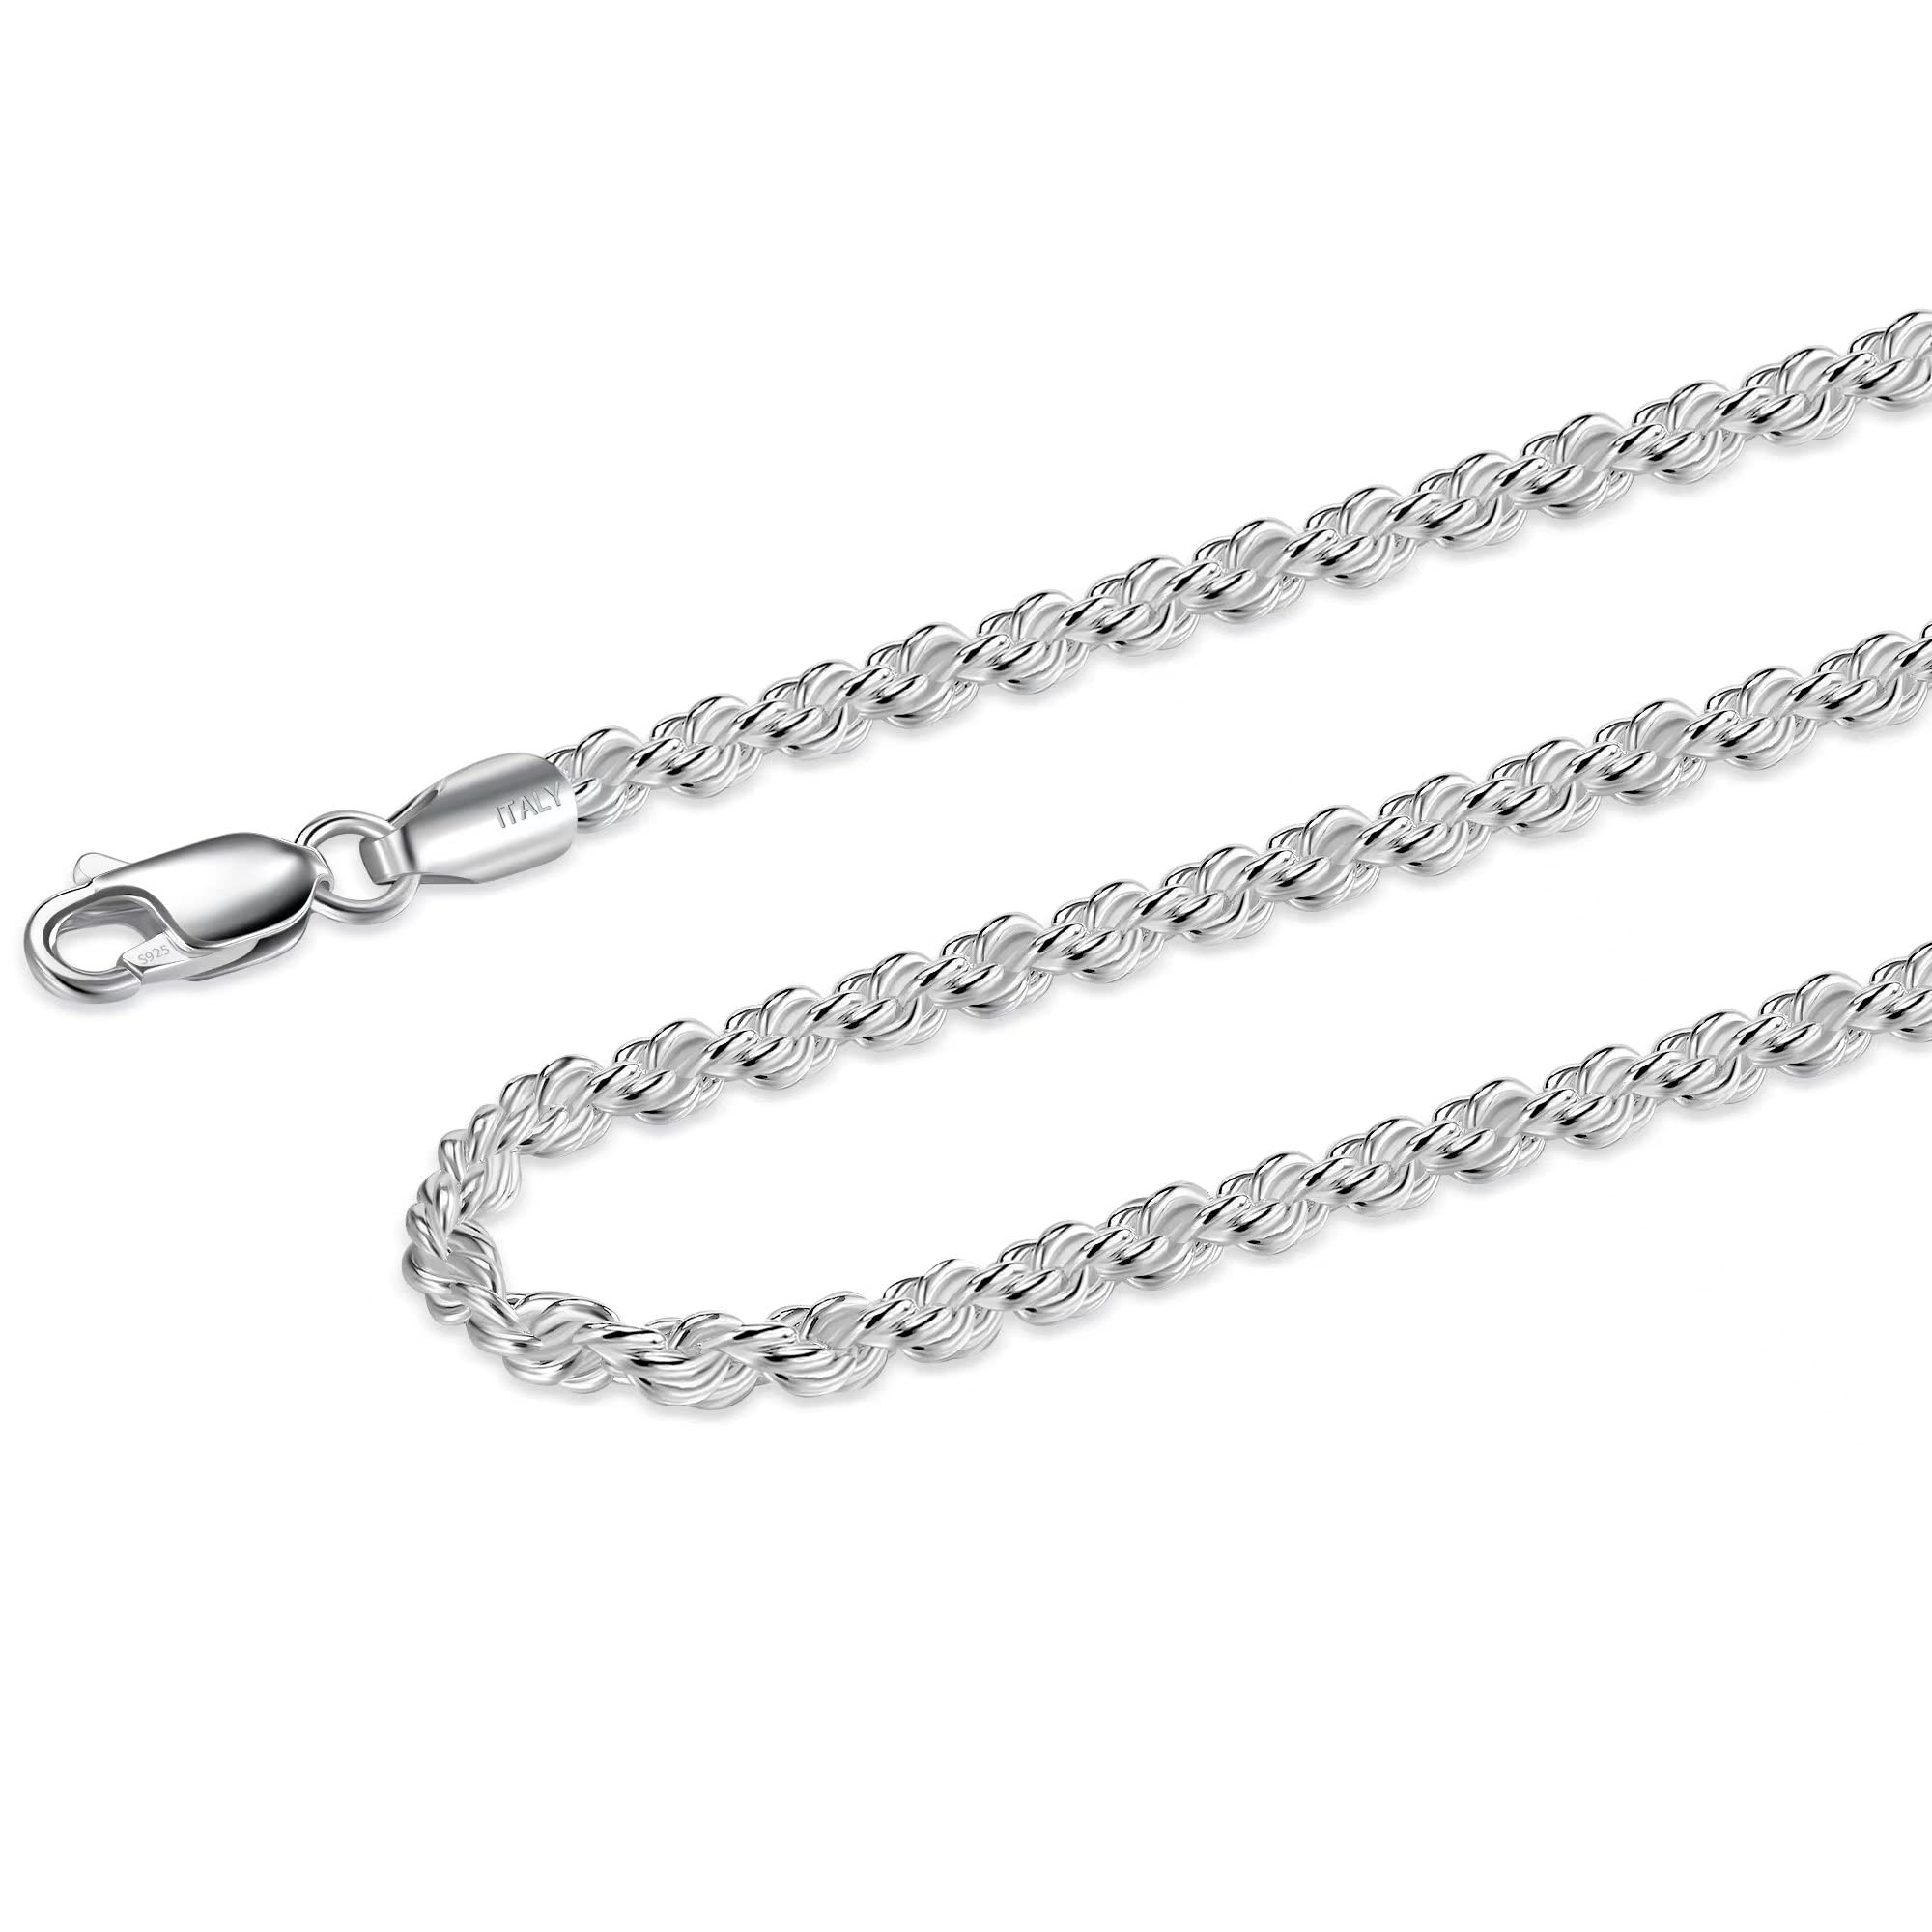 Waitsoul 925 Sterling Silver Rope chain Lobster clasp 25mm Silver chain for Men Women Silver Necklace chain 16-30 Inches(16)